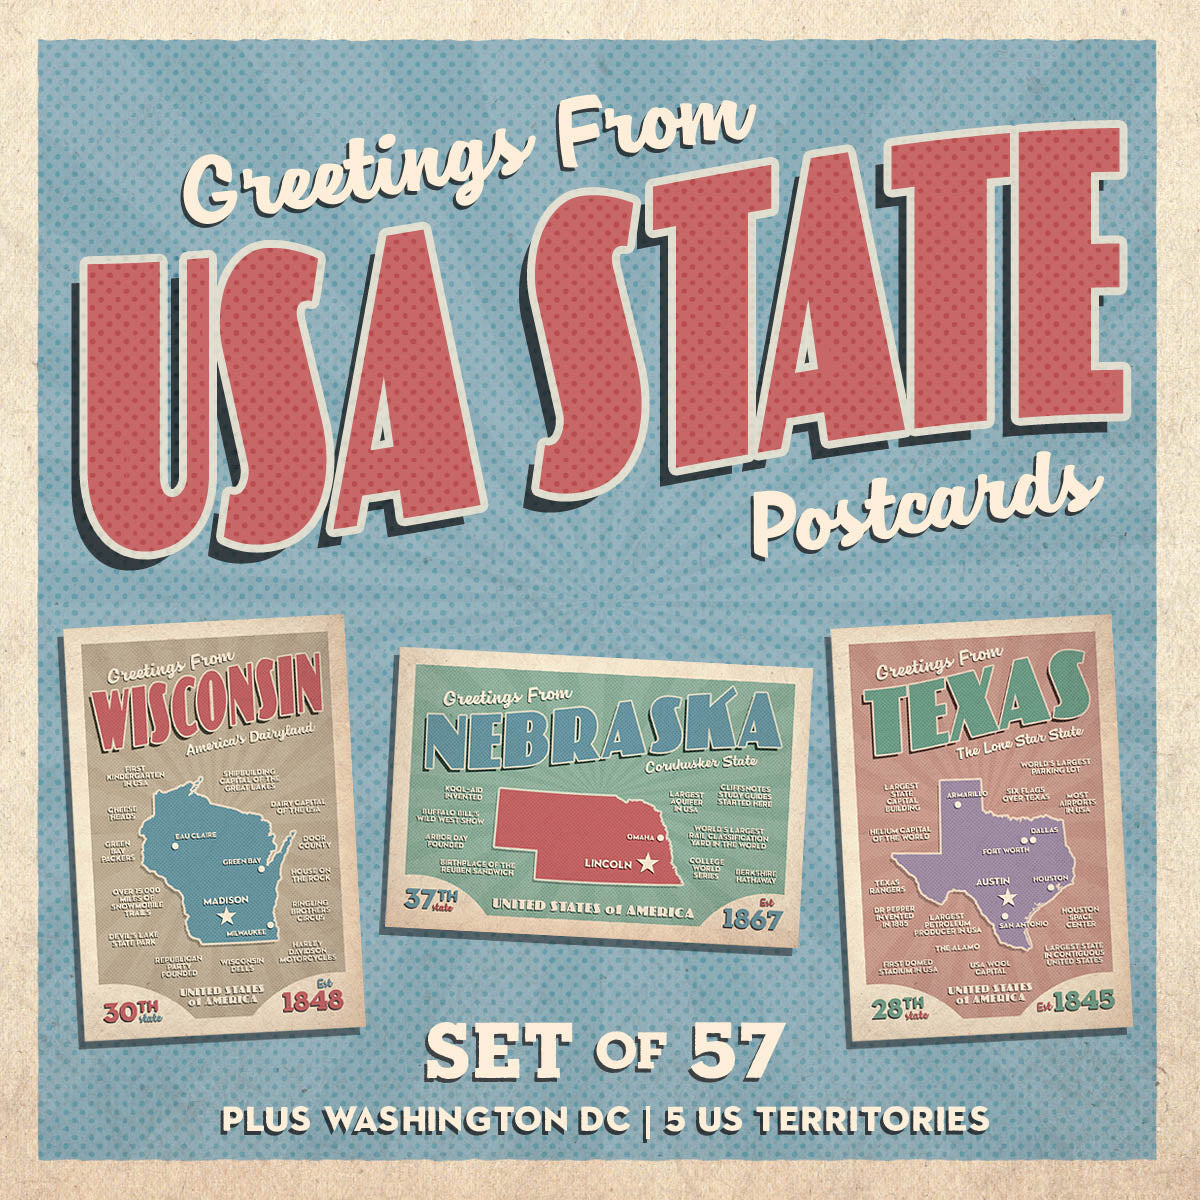 Should We Redesign the Greetings from USA State Postcards?